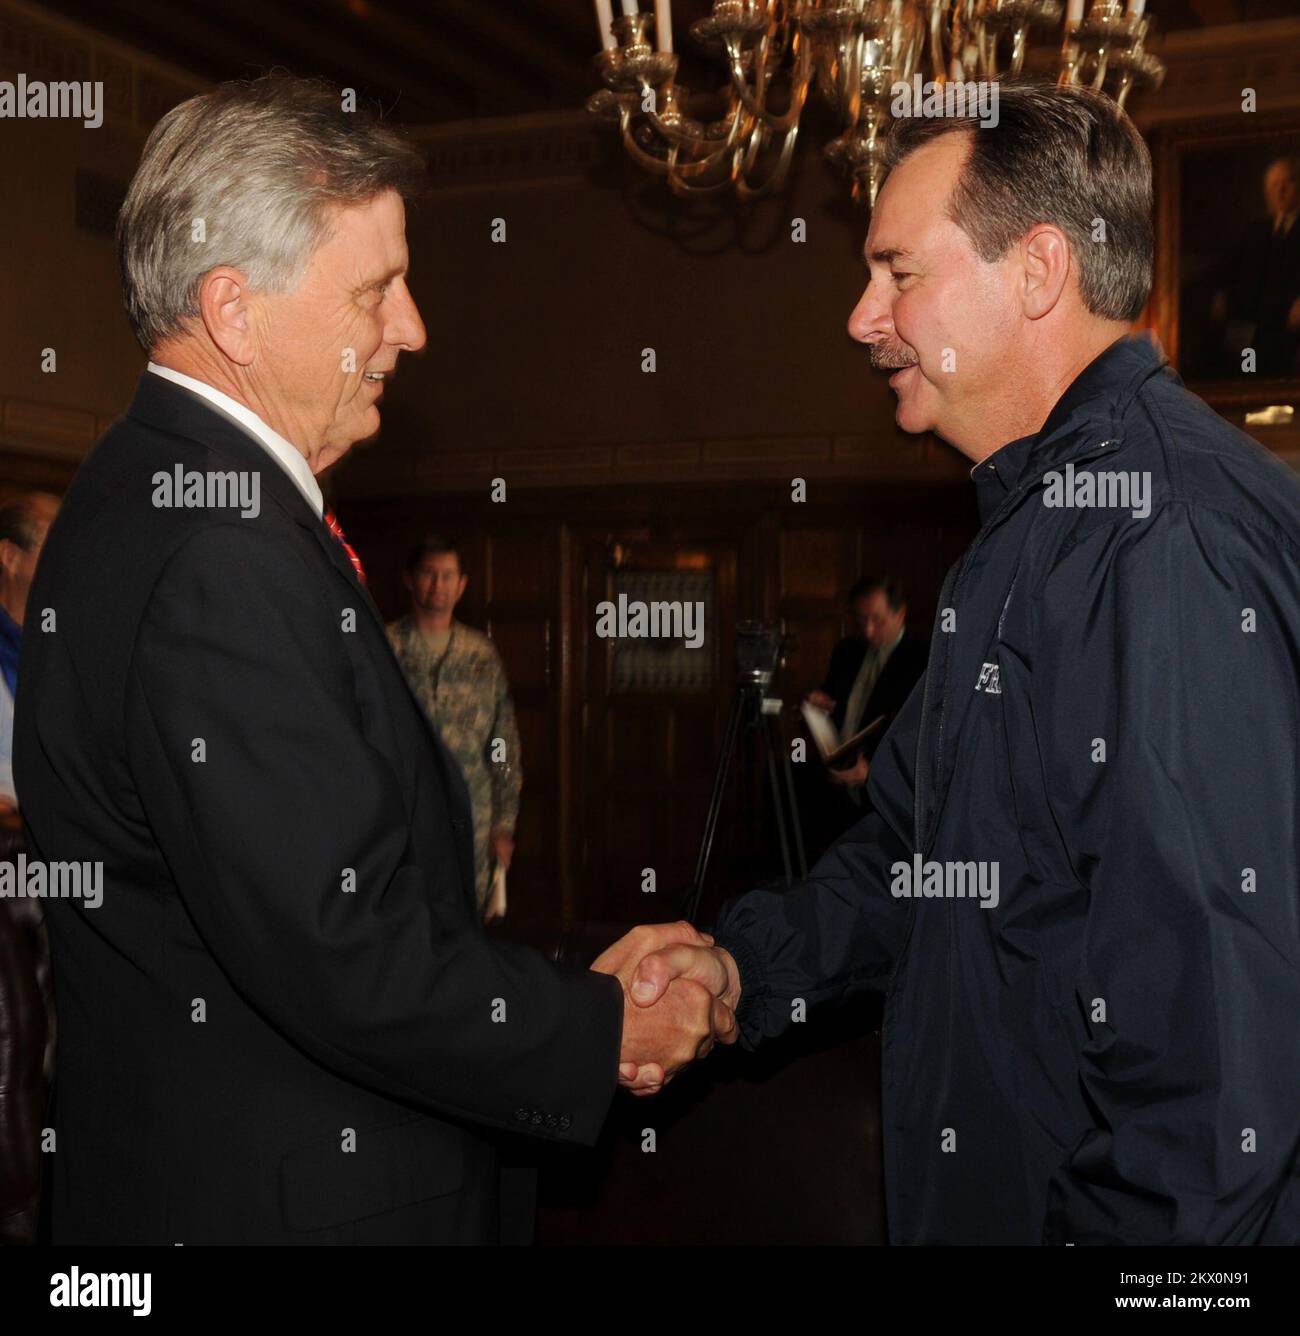 Severe Storms, Tornadoes, and Flooding,  Little Rock, AR, March 31, 2008   FEMA Administrator Dave Paulison, right greets Governor Mike Beebe, at the State House prior to a meeting and press conference. LIttle Rock, AR-FEMA Admistrator Dave Paulison, right greets Governor Mike Beebe, at the State House prior to a meeting and press conference.. Photographs Relating to Disasters and Emergency Management Programs, Activities, and Officials Stock Photo